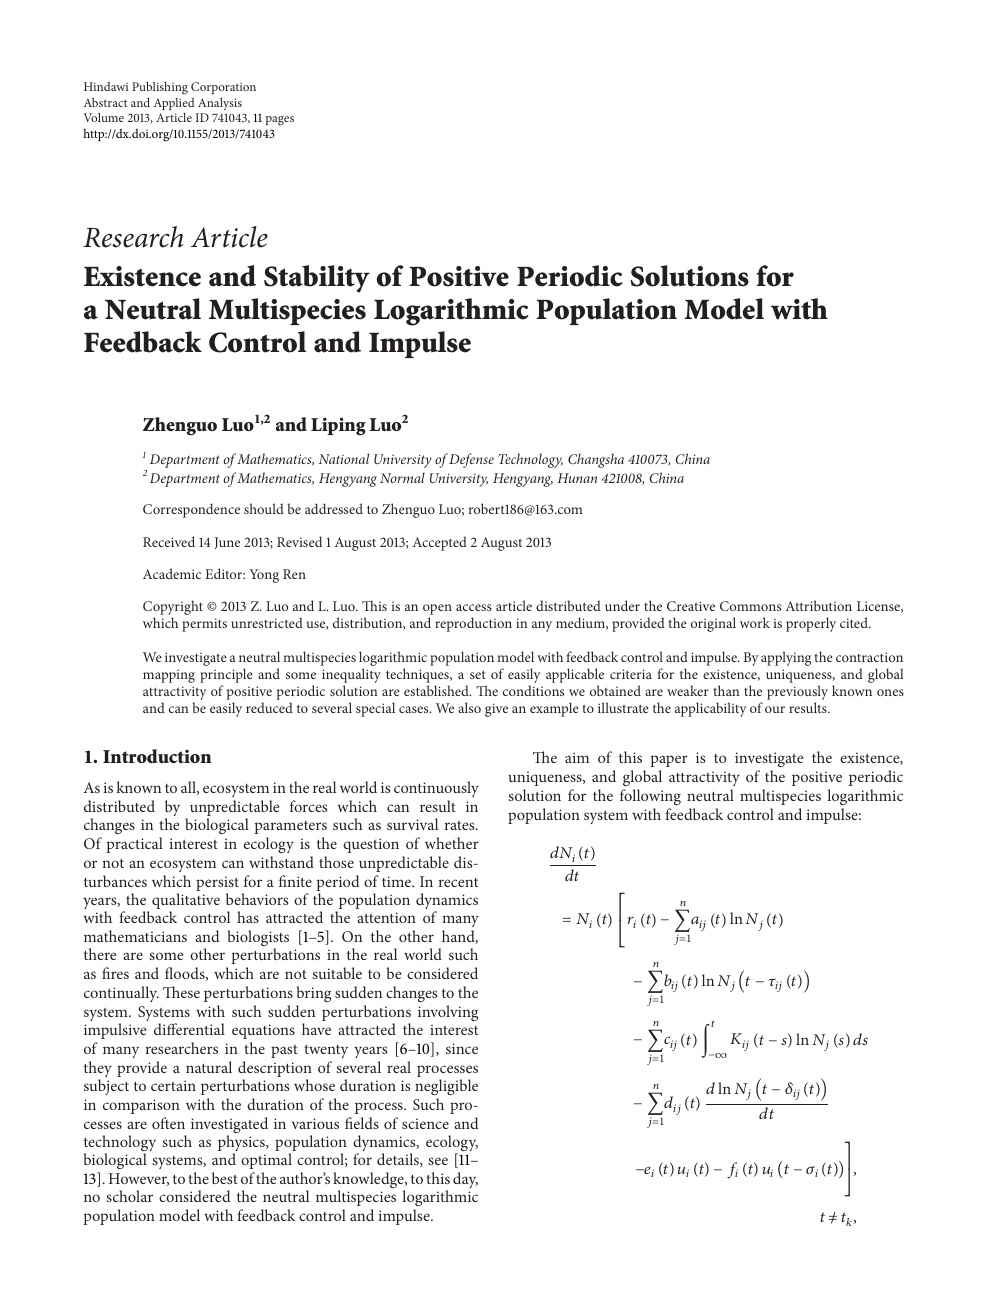 Existence And Stability Of Positive Periodic Solutions For A Neutral Multispecies Logarithmic Population Model With Feedback Control And Impulse Topic Of Research Paper In Mathematics Download Scholarly Article Pdf And Read